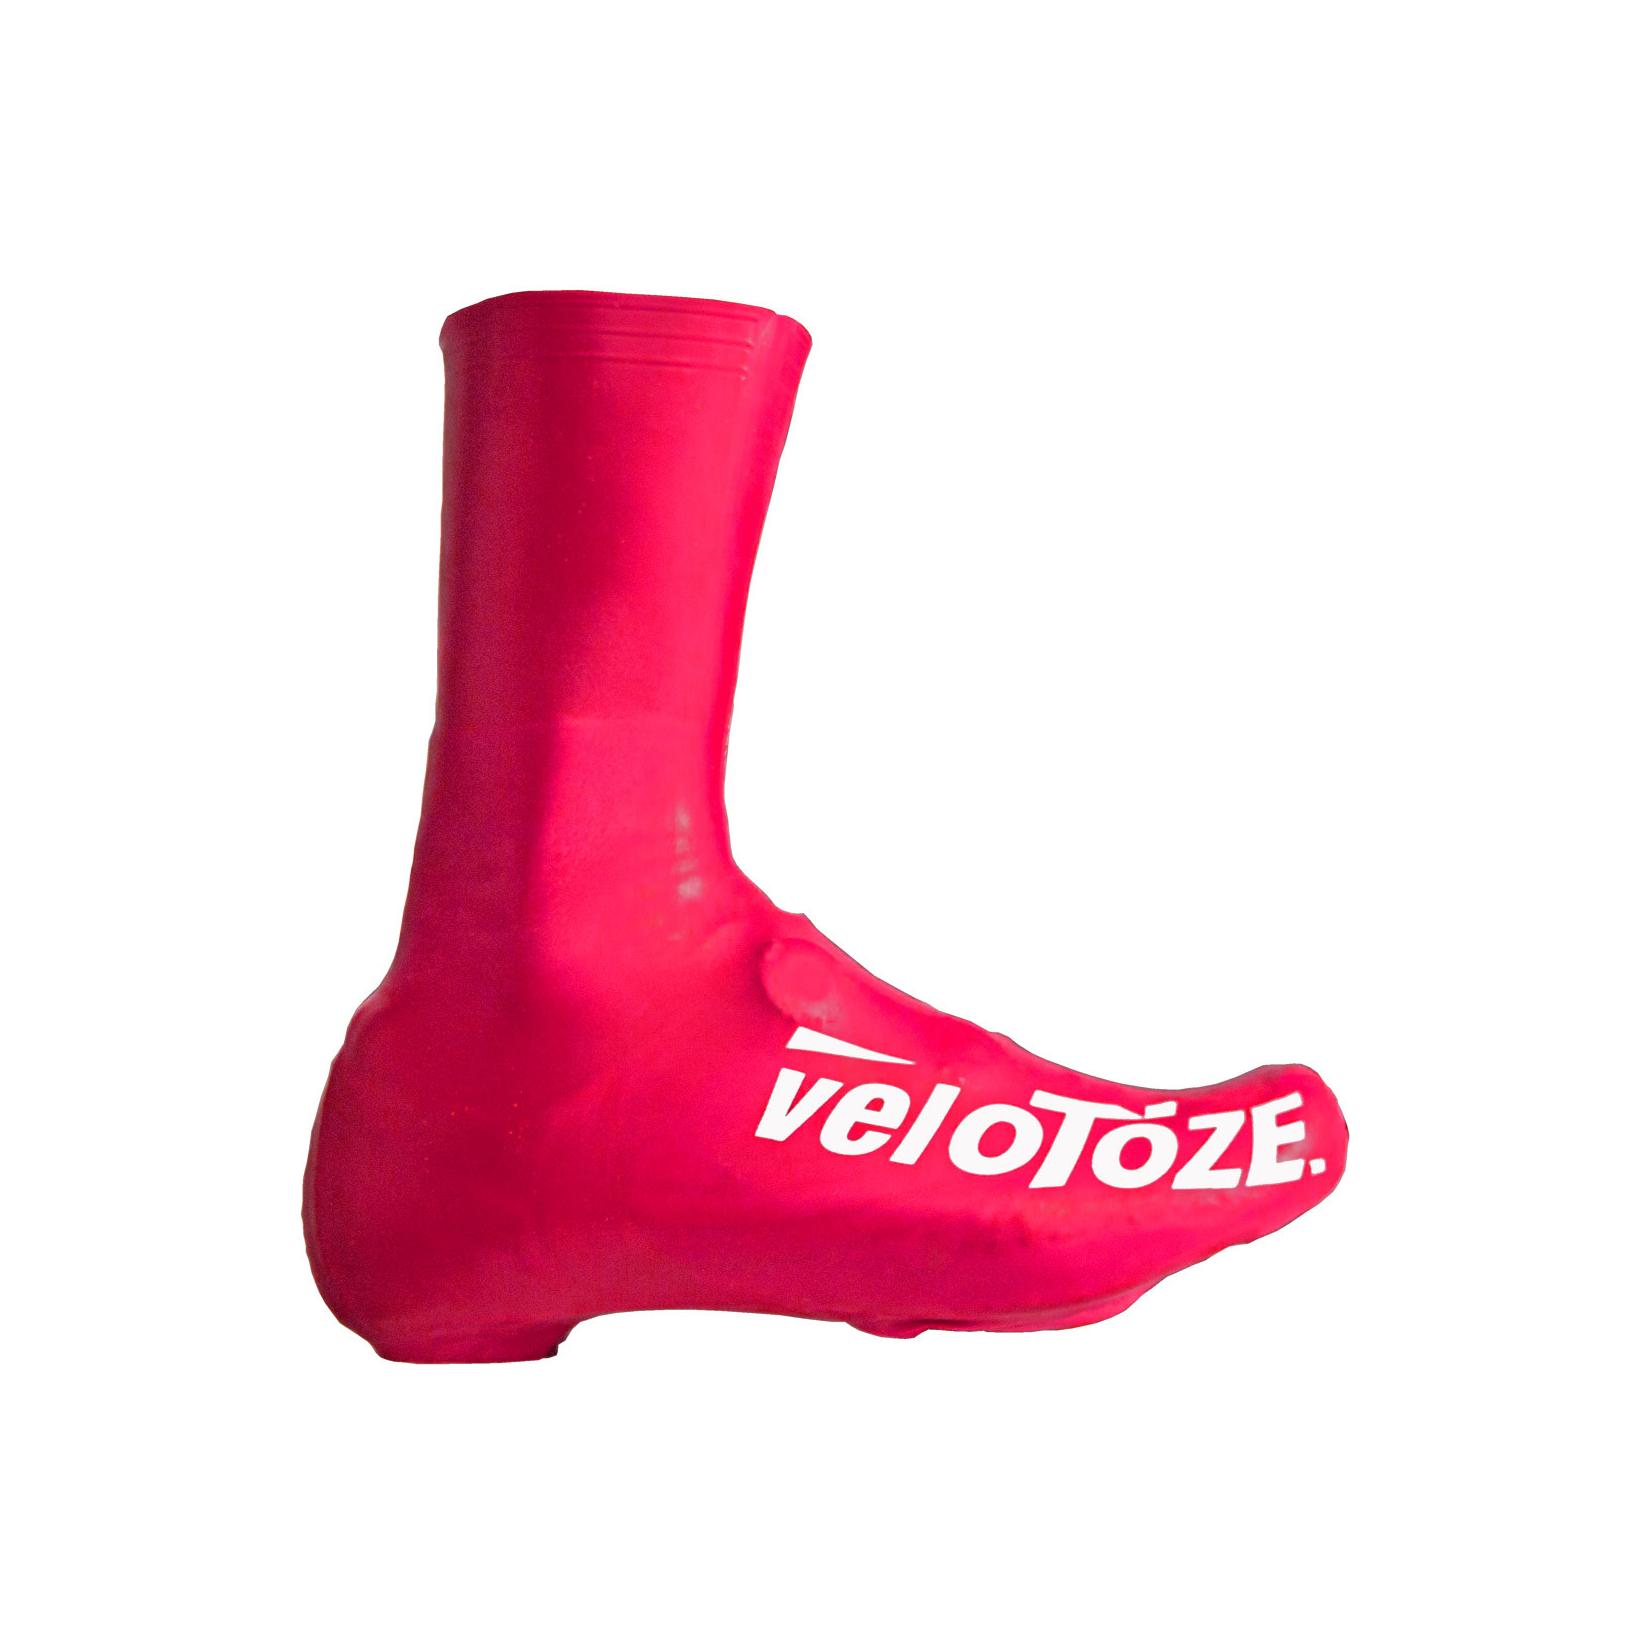 Velotoze COUVRE-CHAUSSURES LATEX HAUTE Rose S 